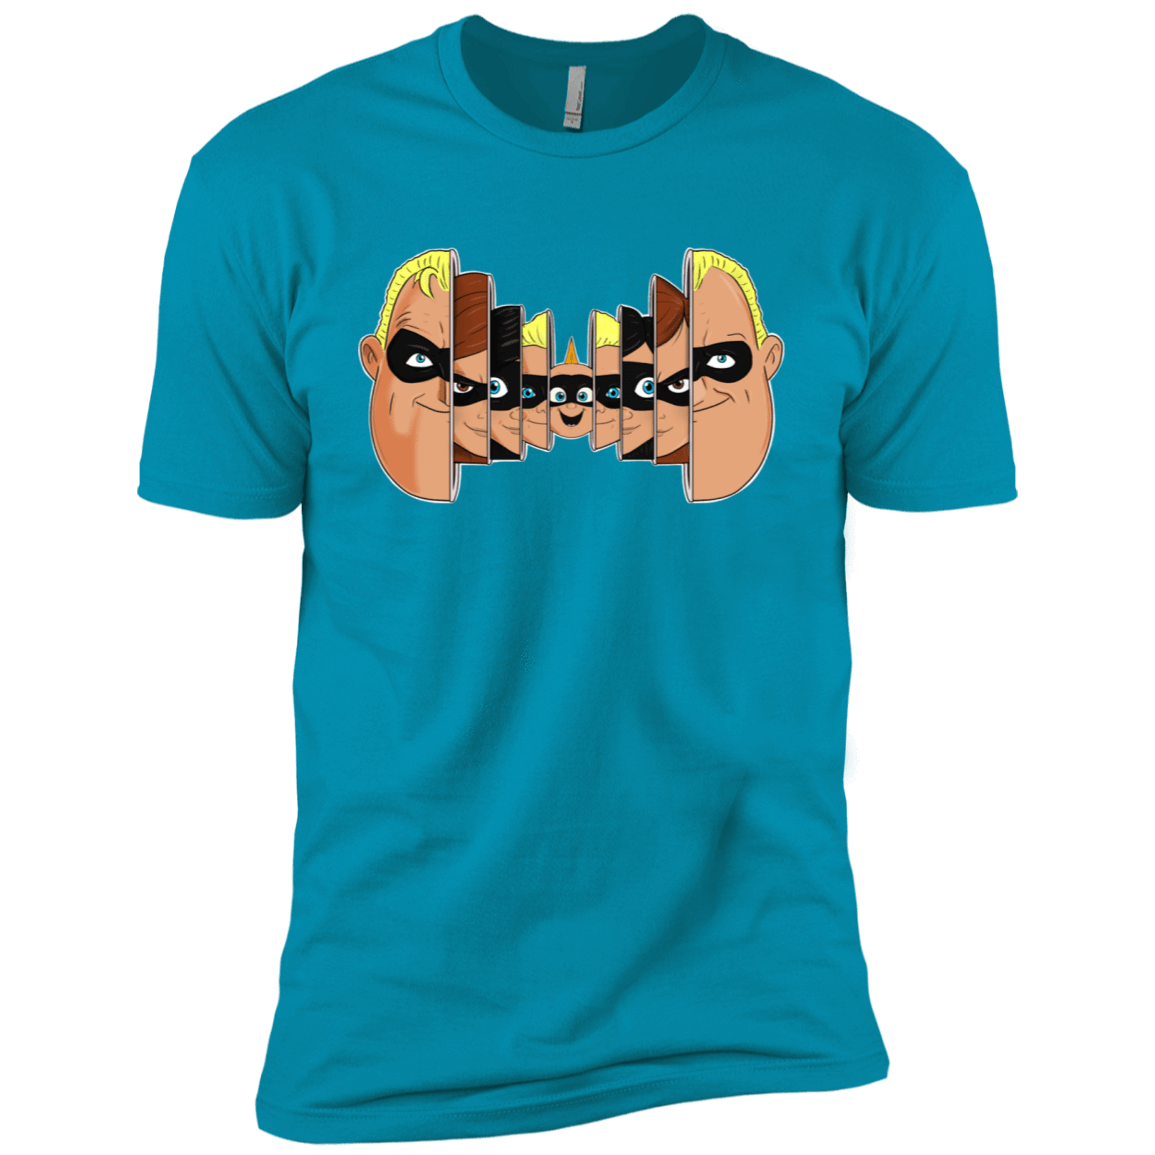 T-Shirts Turquoise / X-Small Incredibles Men's Premium T-Shirt